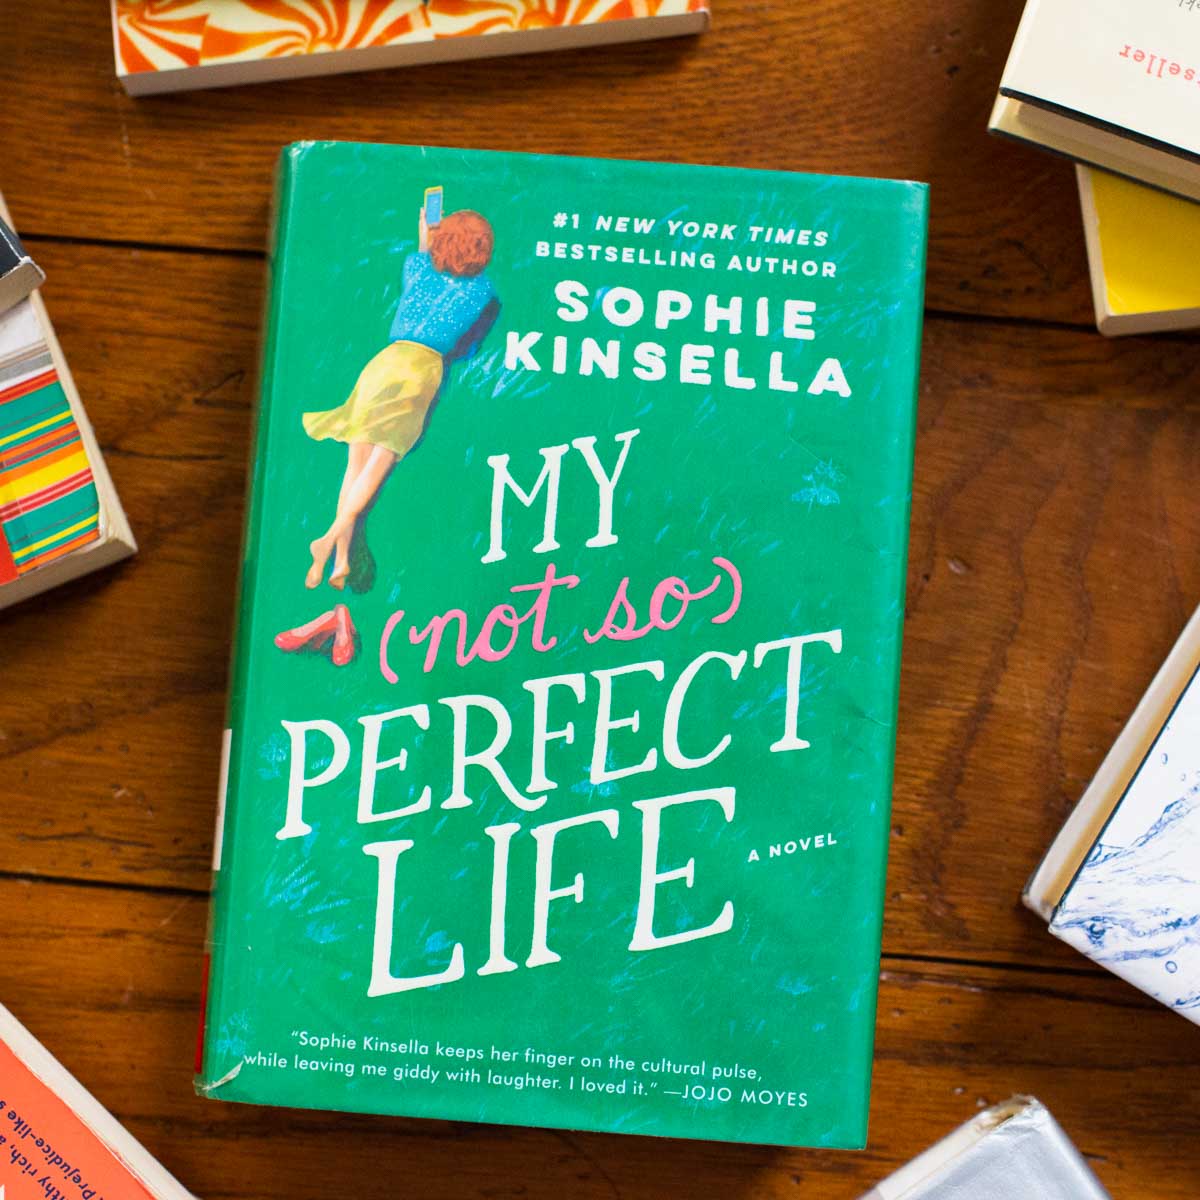 A copy of the book My Not So Perfect Life is on the table.